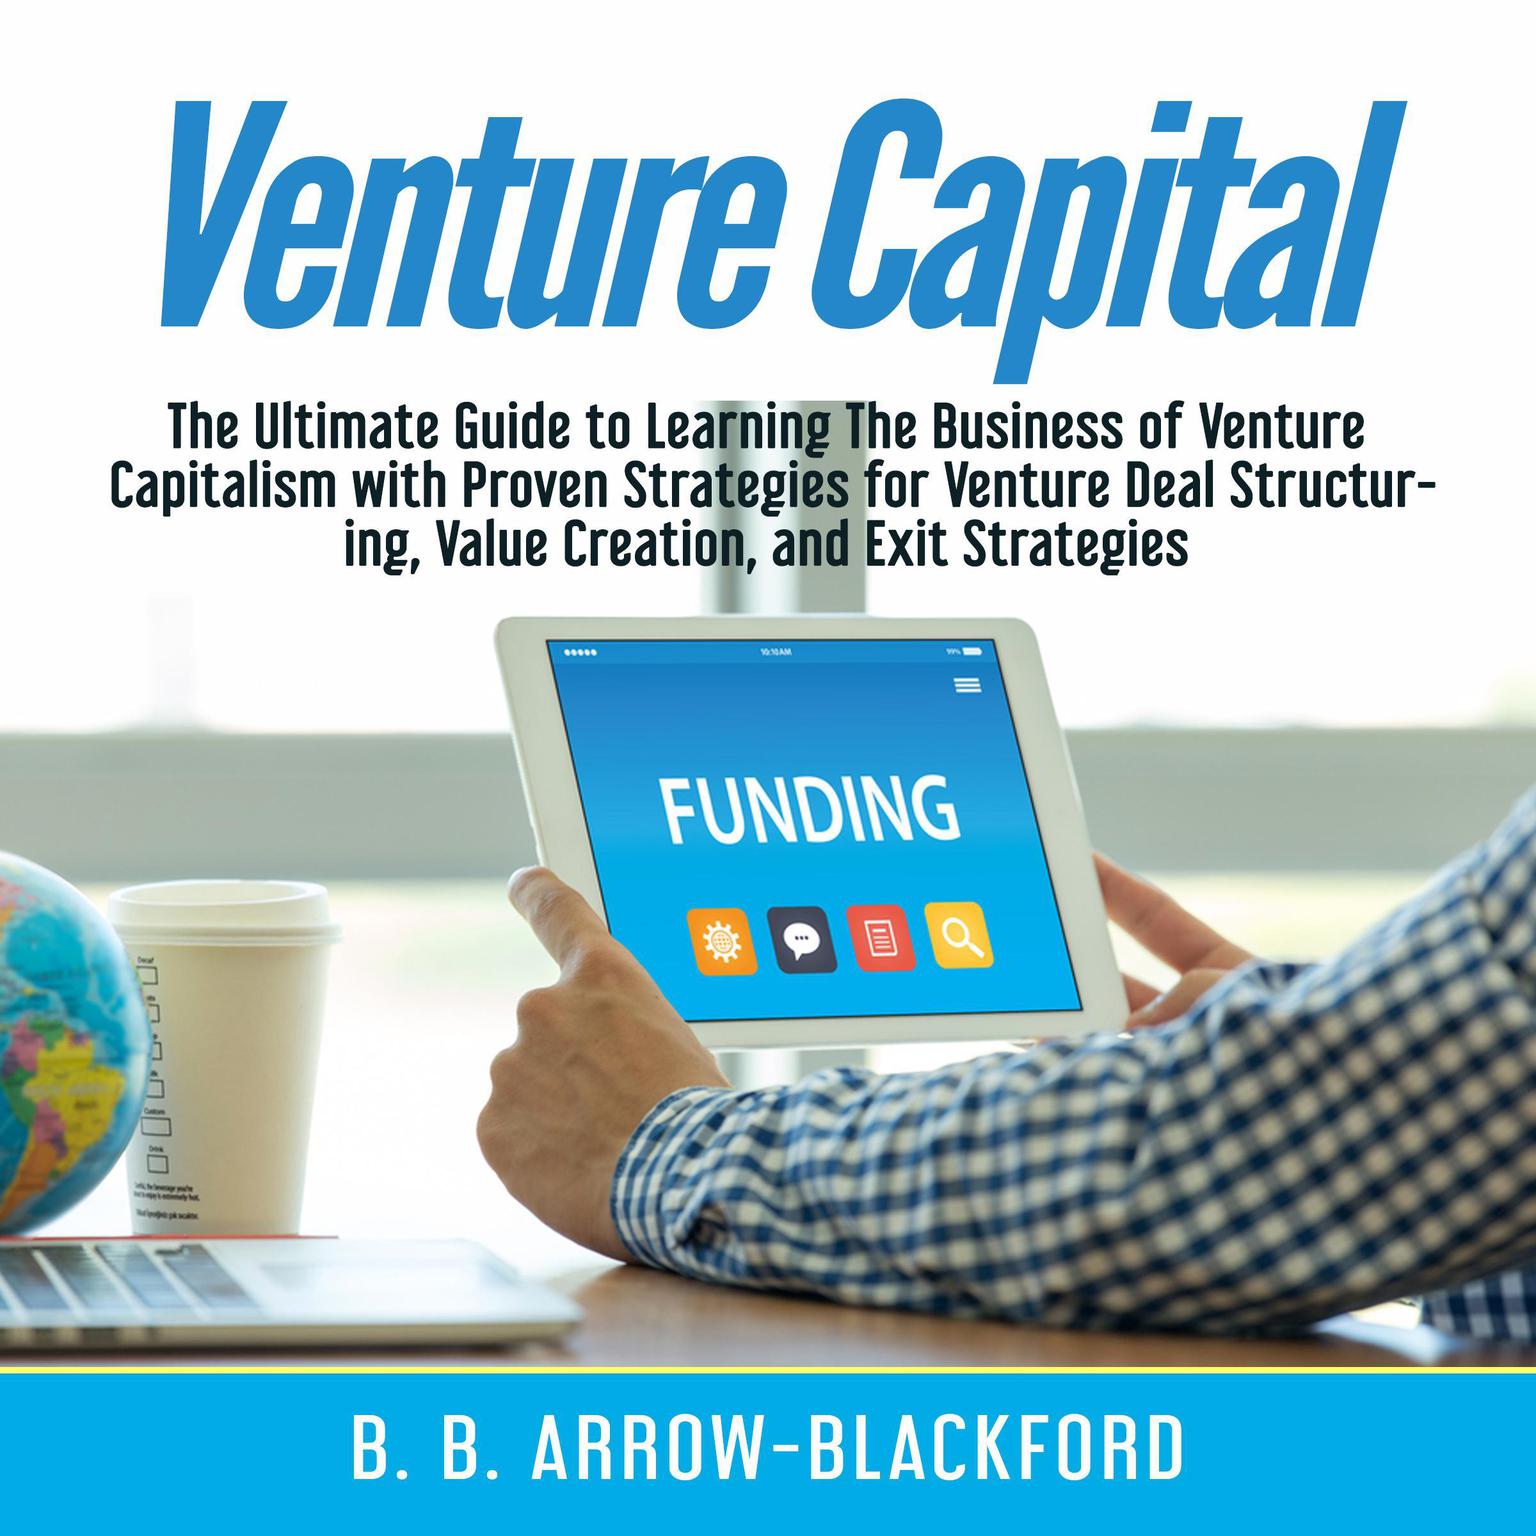 Venture Capital: The Ultimate Guide to Learning The Business of Venture Capitalism with Proven Strategies for Venture Deal Structuring, Value Creation, and Exit Strategies Audiobook, by B. B. Arrow-Blackford